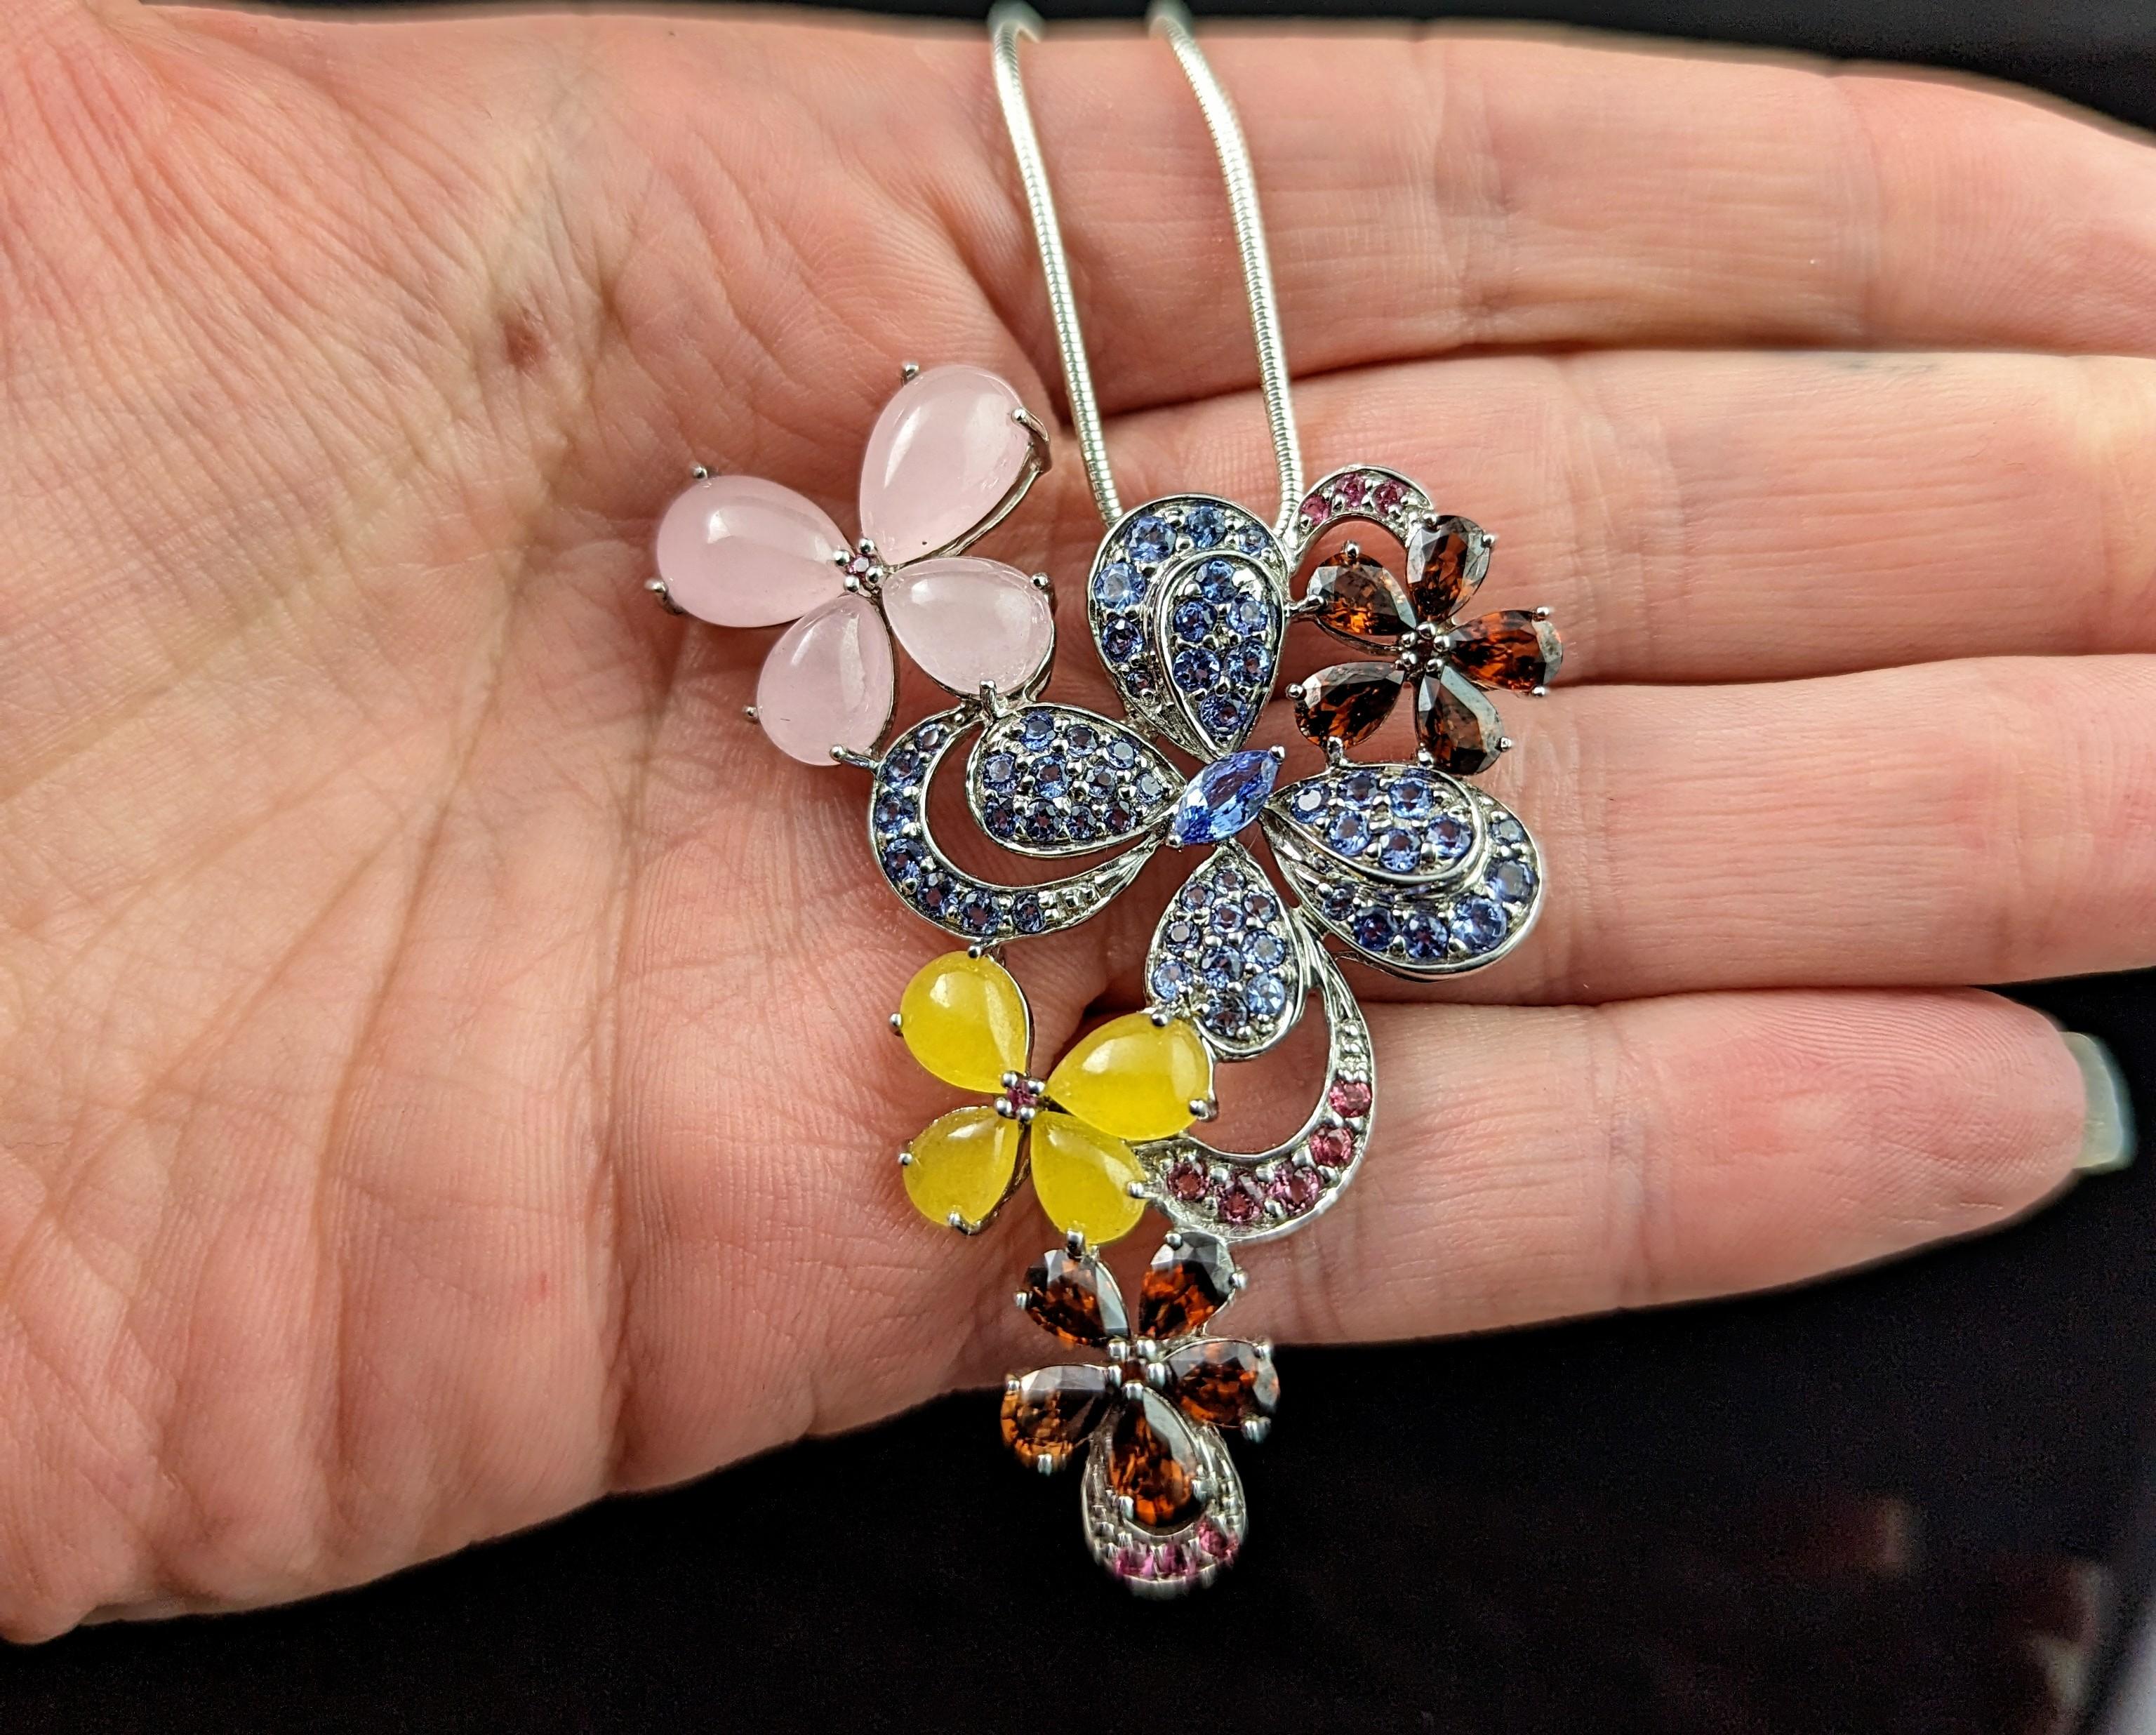 This vintage sterling silver and gem set pendant is so pretty and the perfect piece for the warmer sunny months.

Crafted in cool sterling silver it has variously designed butterflies and flowers set with an array of colourful gemstones including